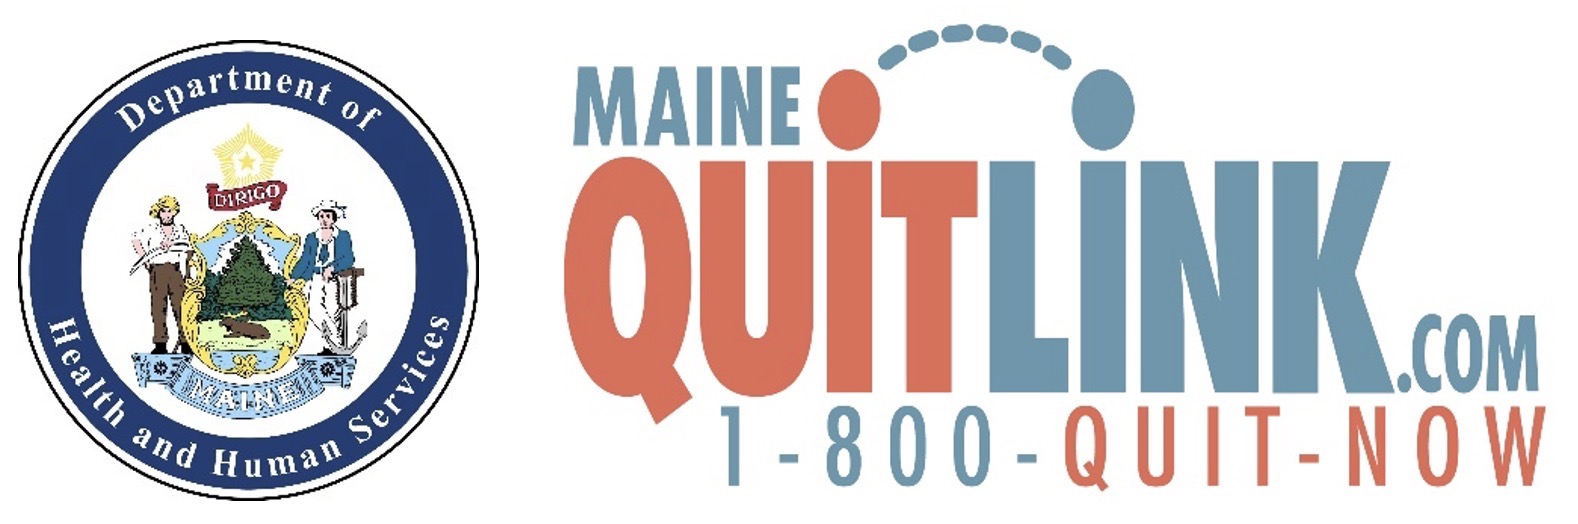 Cannabis Prevention in Maine, MeCDC